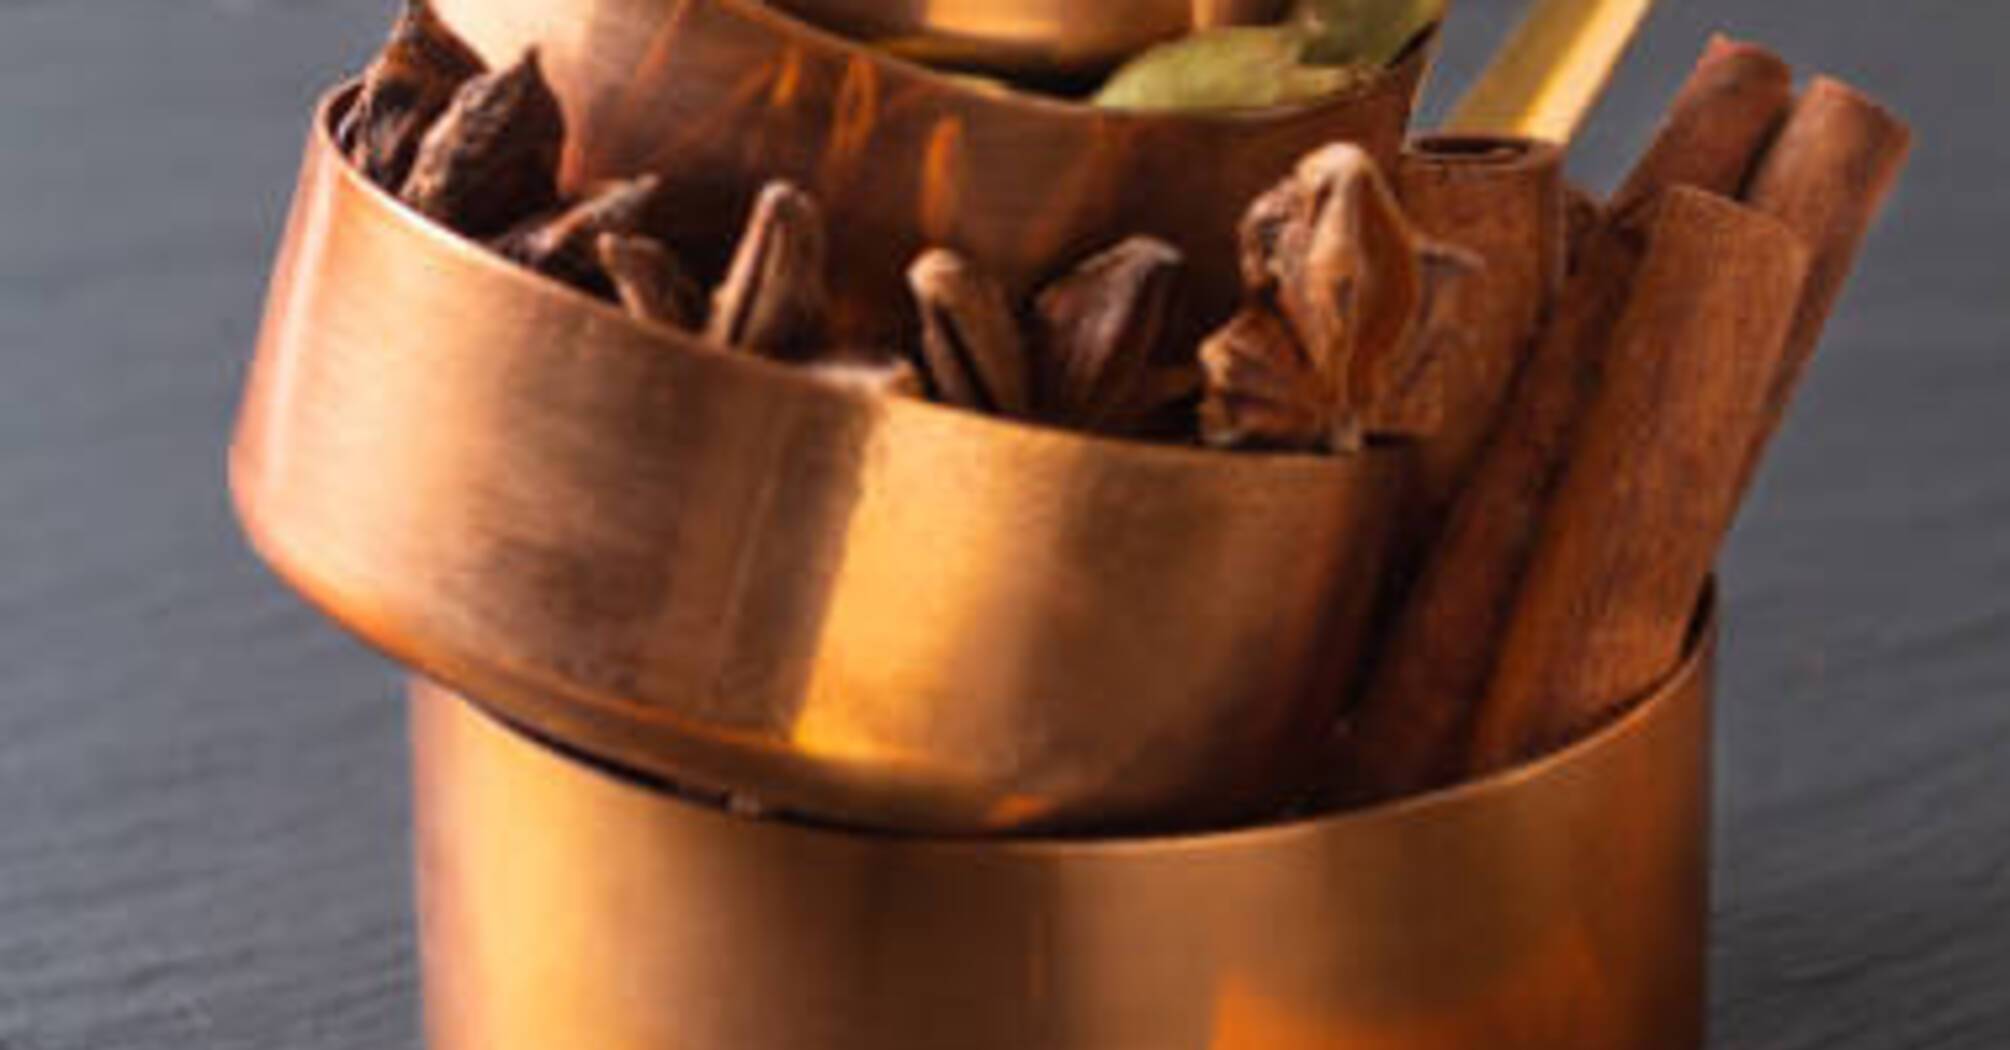 Is it worth buying copper cookware? All the pros and cons